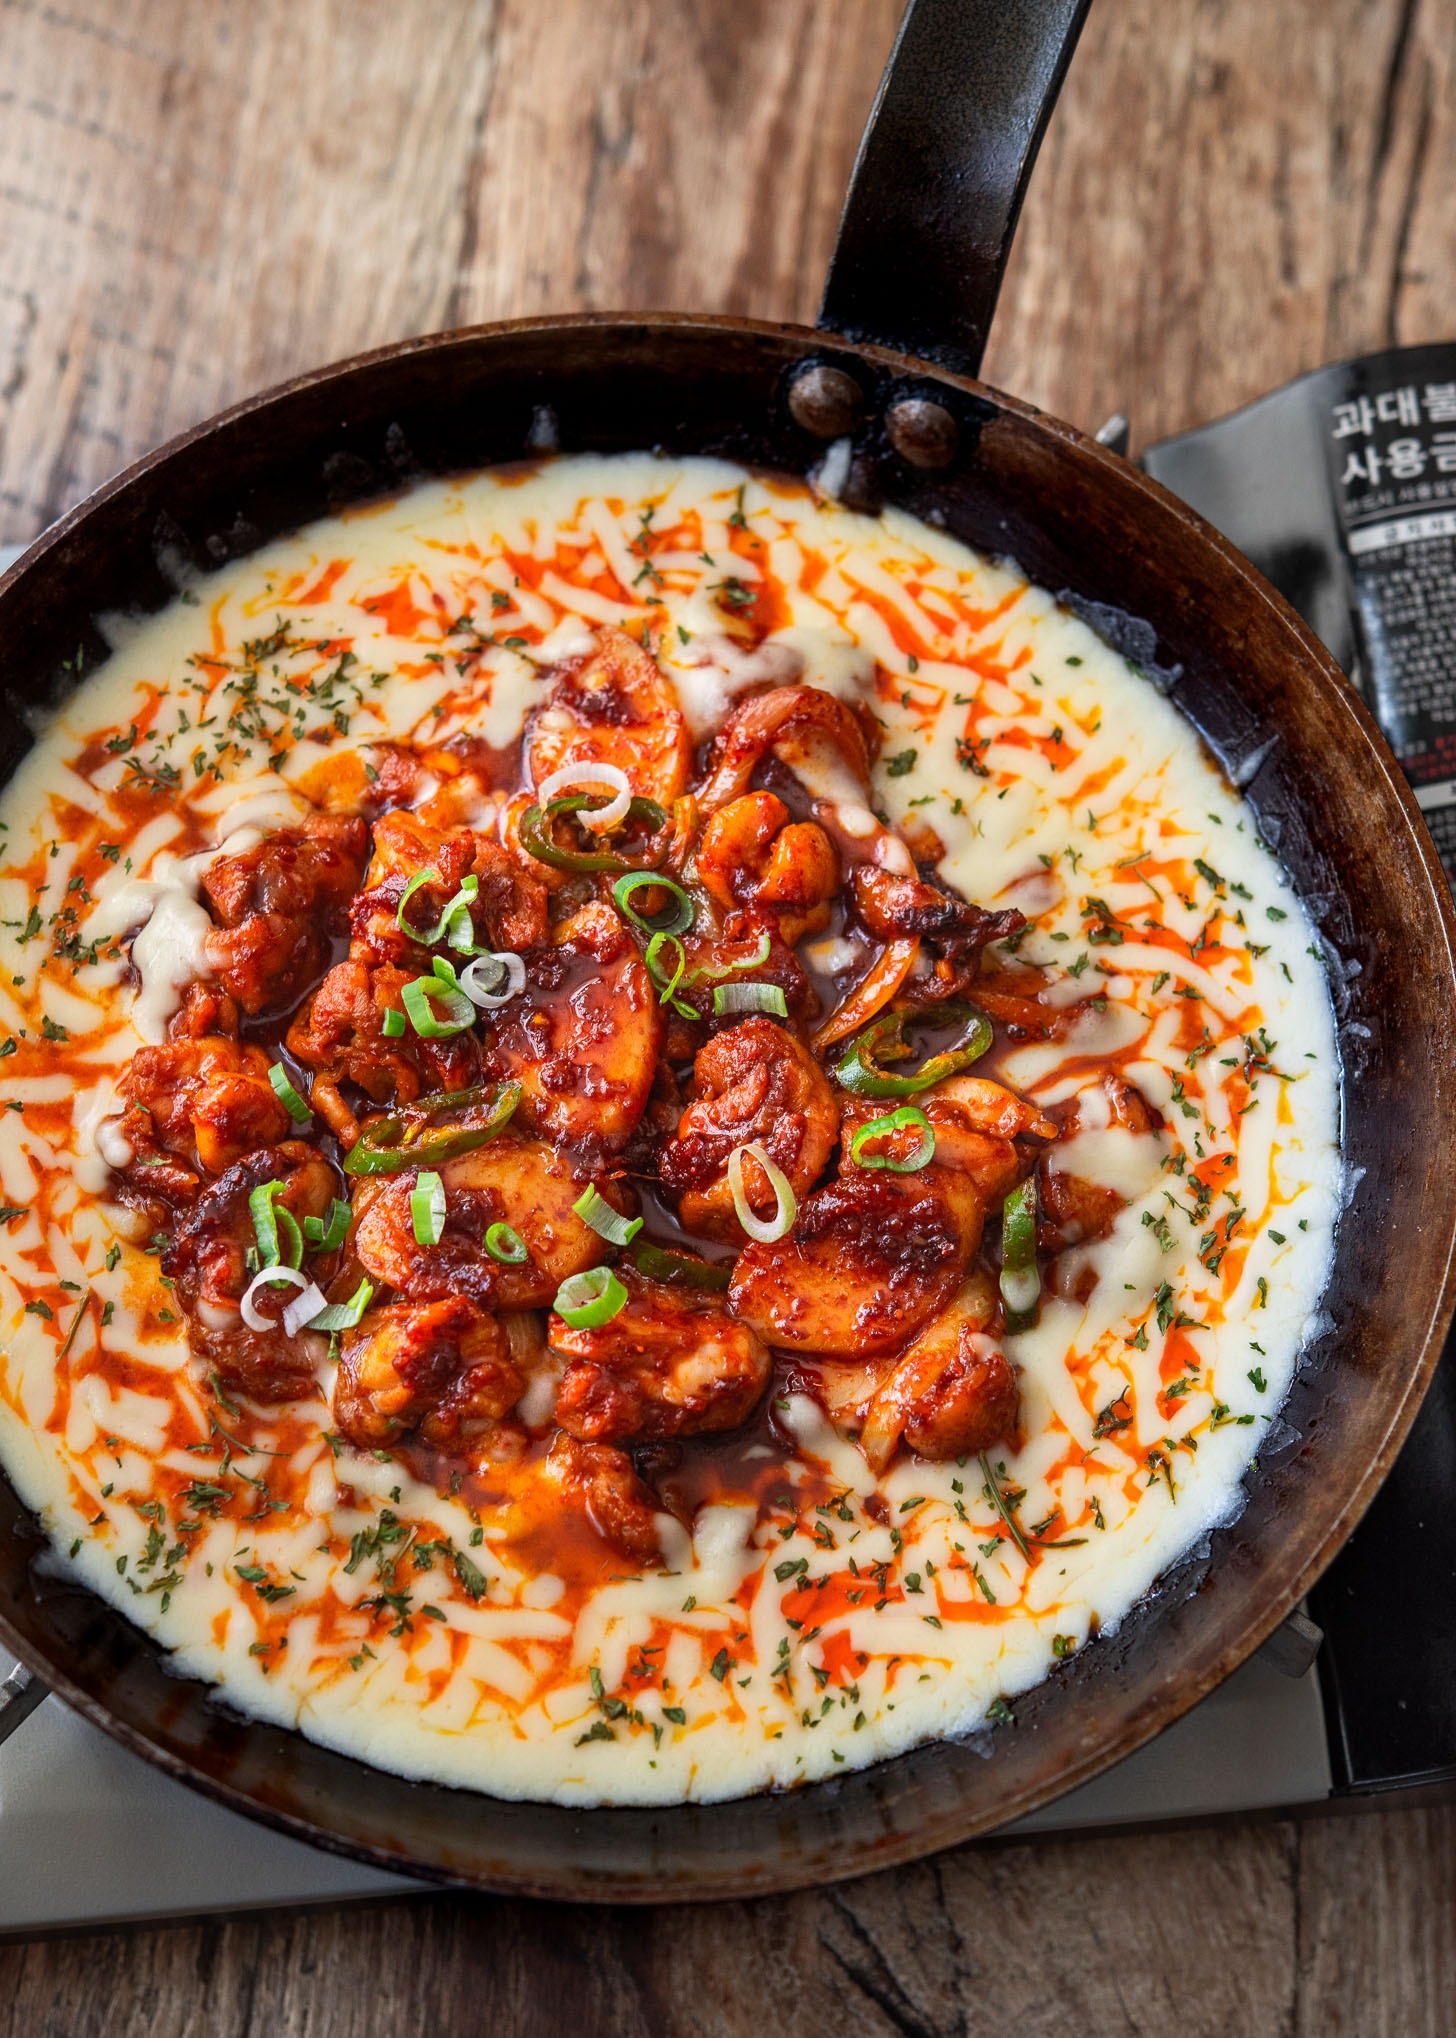 Buldak, Korean fire chicken, with melted cheese in a skillet.